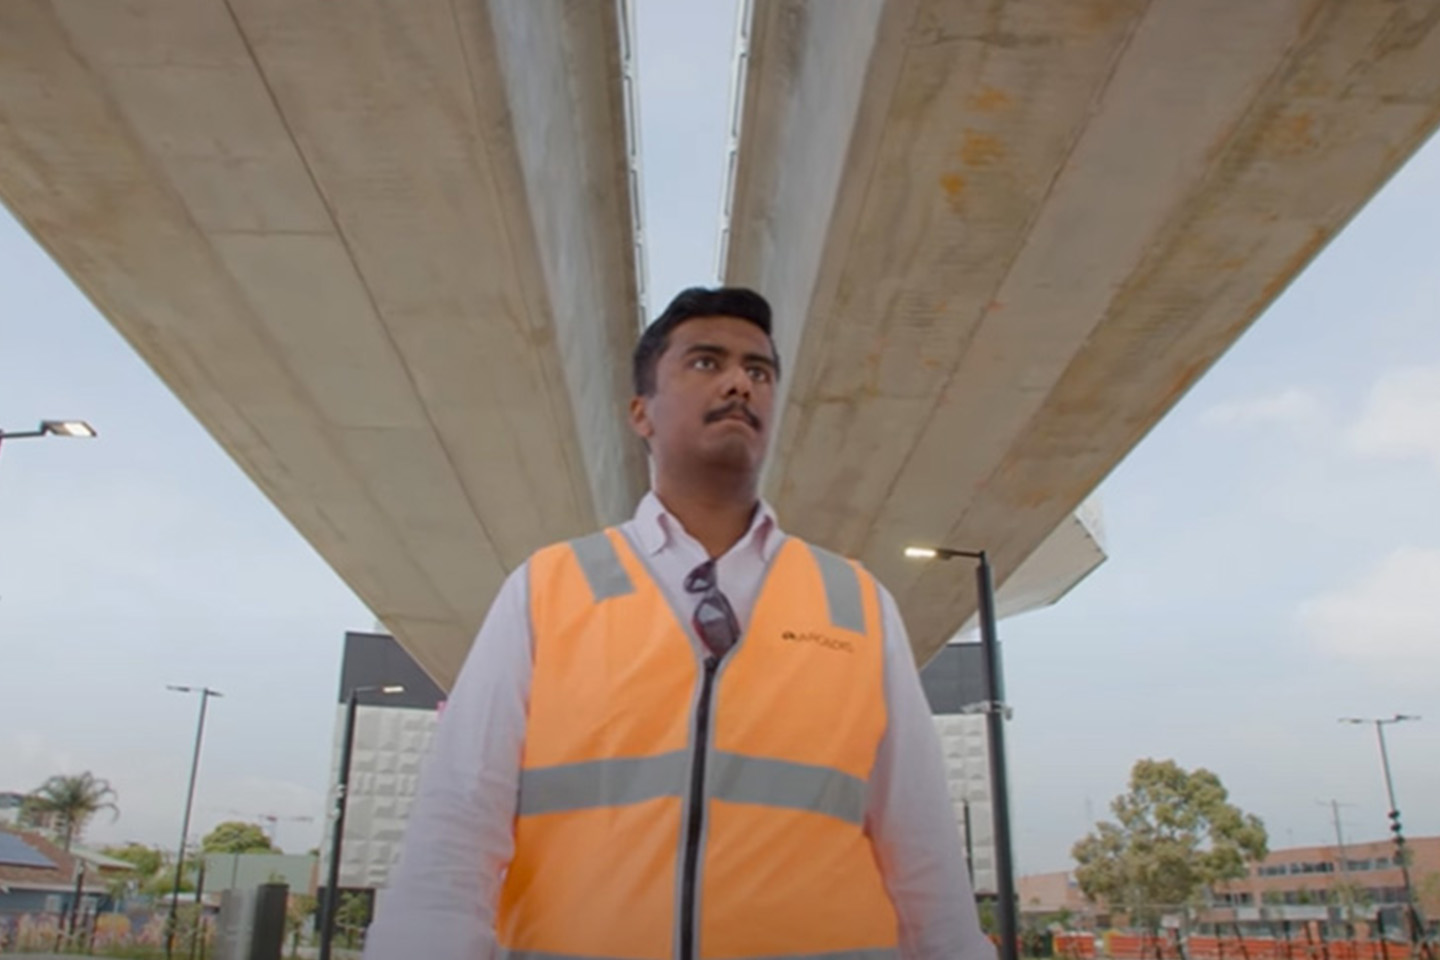 Hasan in an orange safety vest pictured under a bridge with two sections